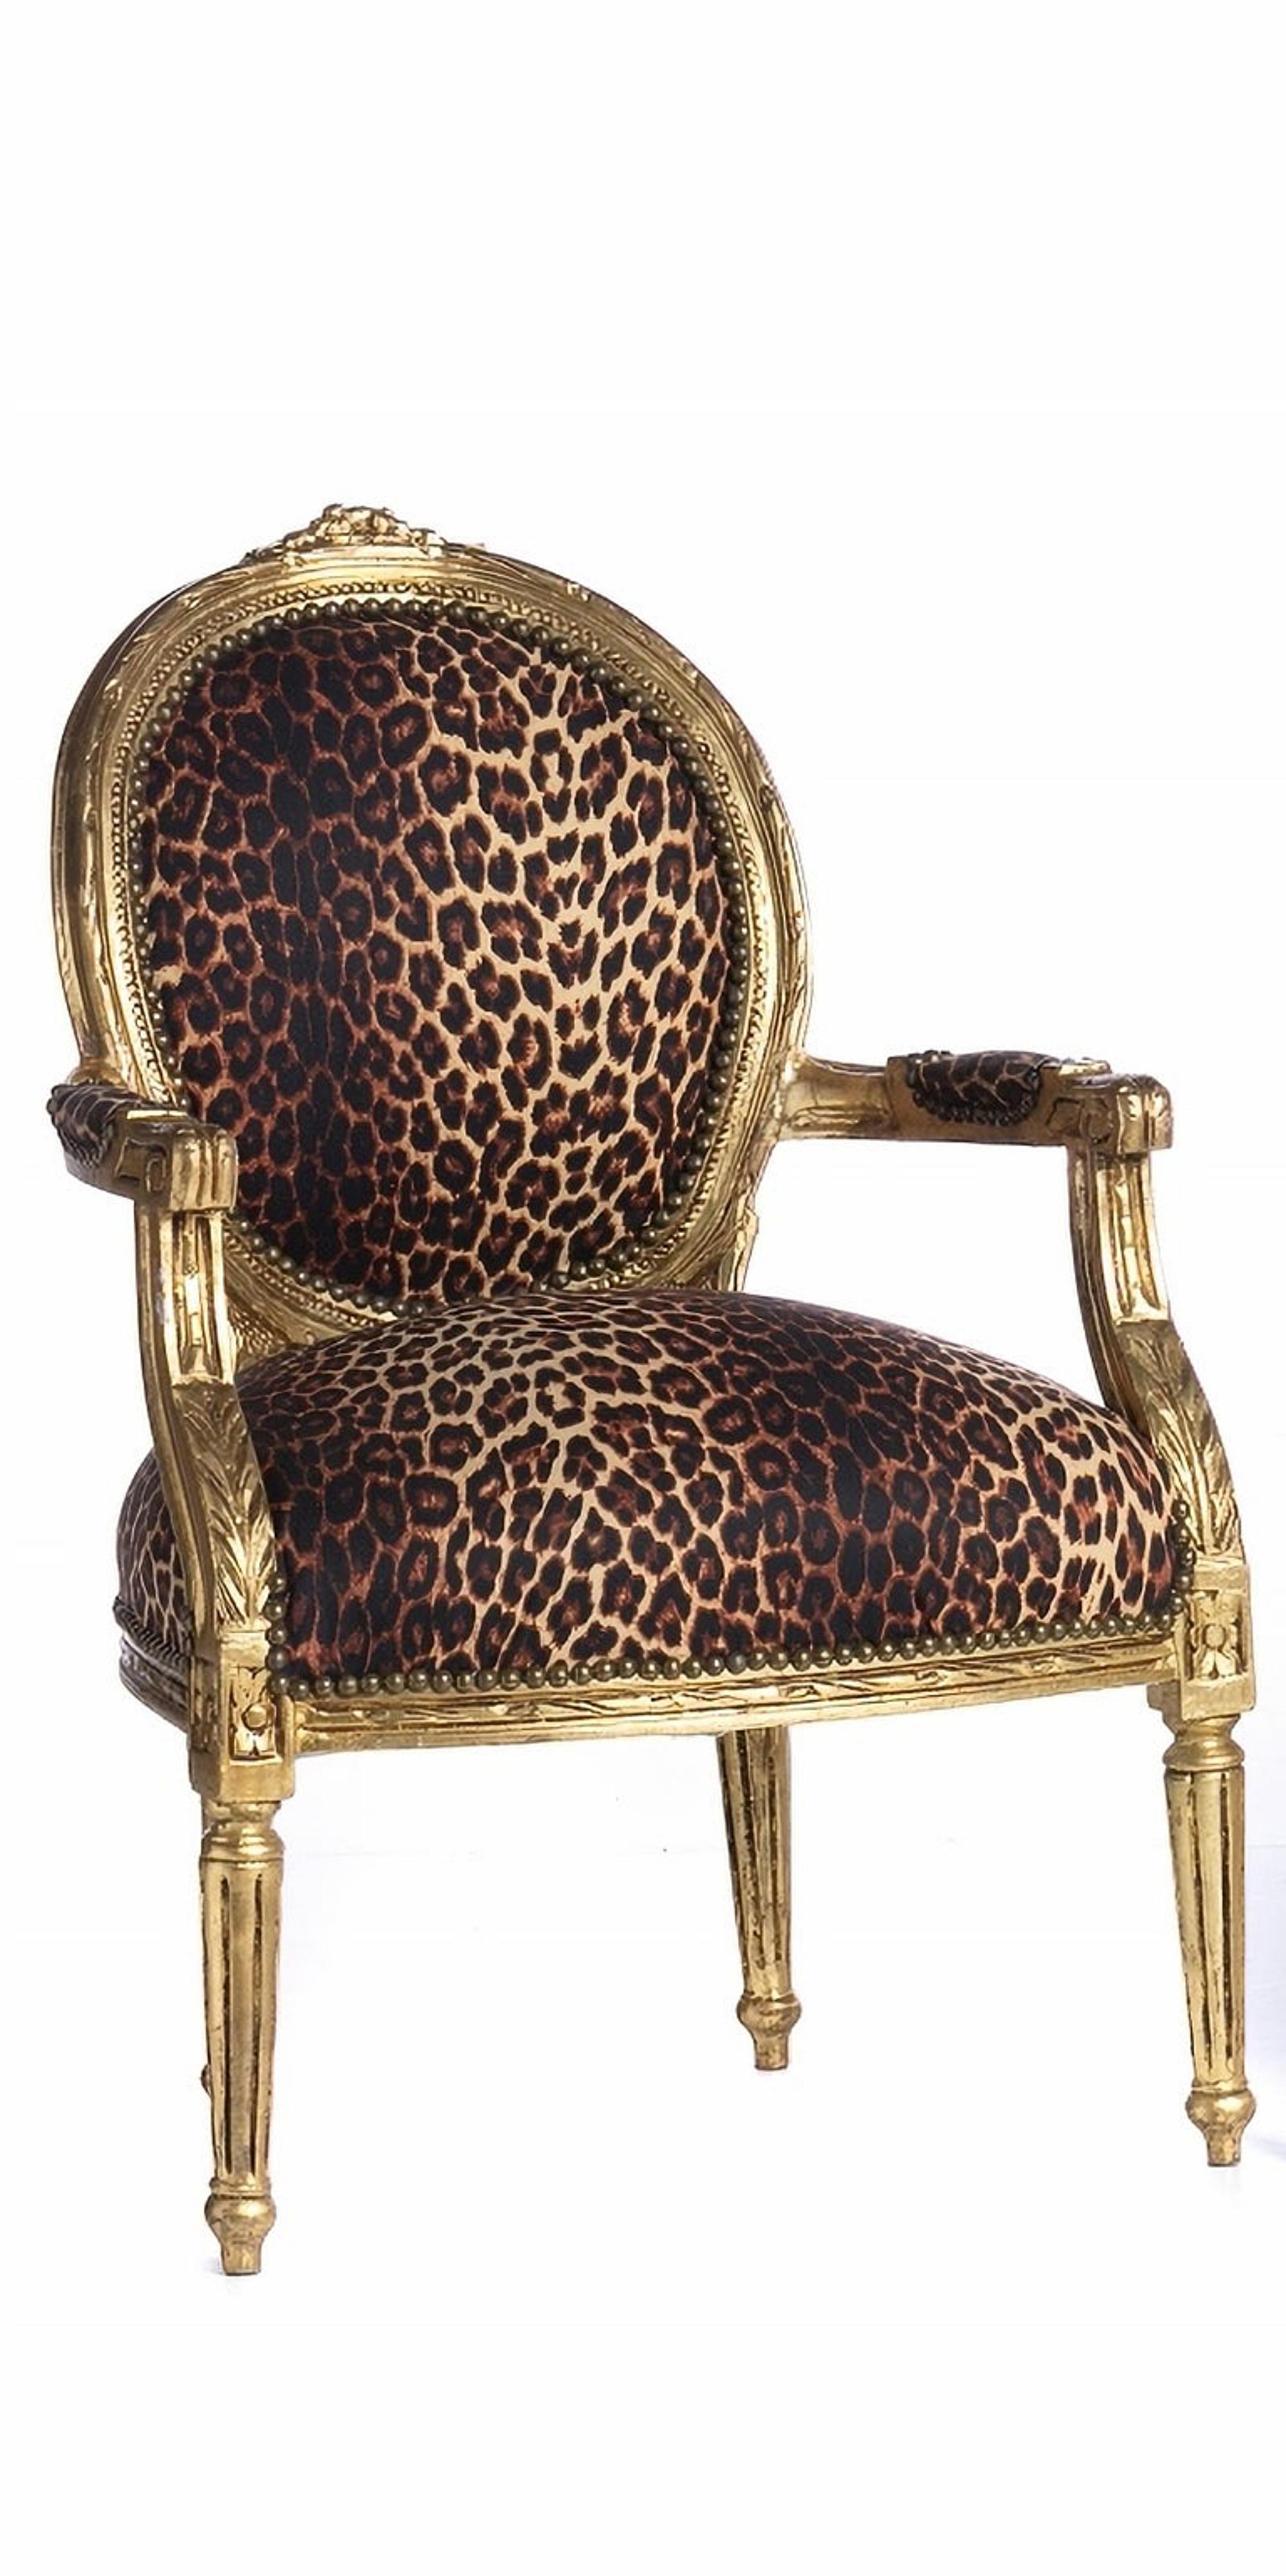 20th century 3 armchair set
Germans
in carved and gilded wood, decorated with plant motifs. 
Seats and back upholstered with studs. 
Signs of use. 
DIM.: 97 x 64 x 50 cm.